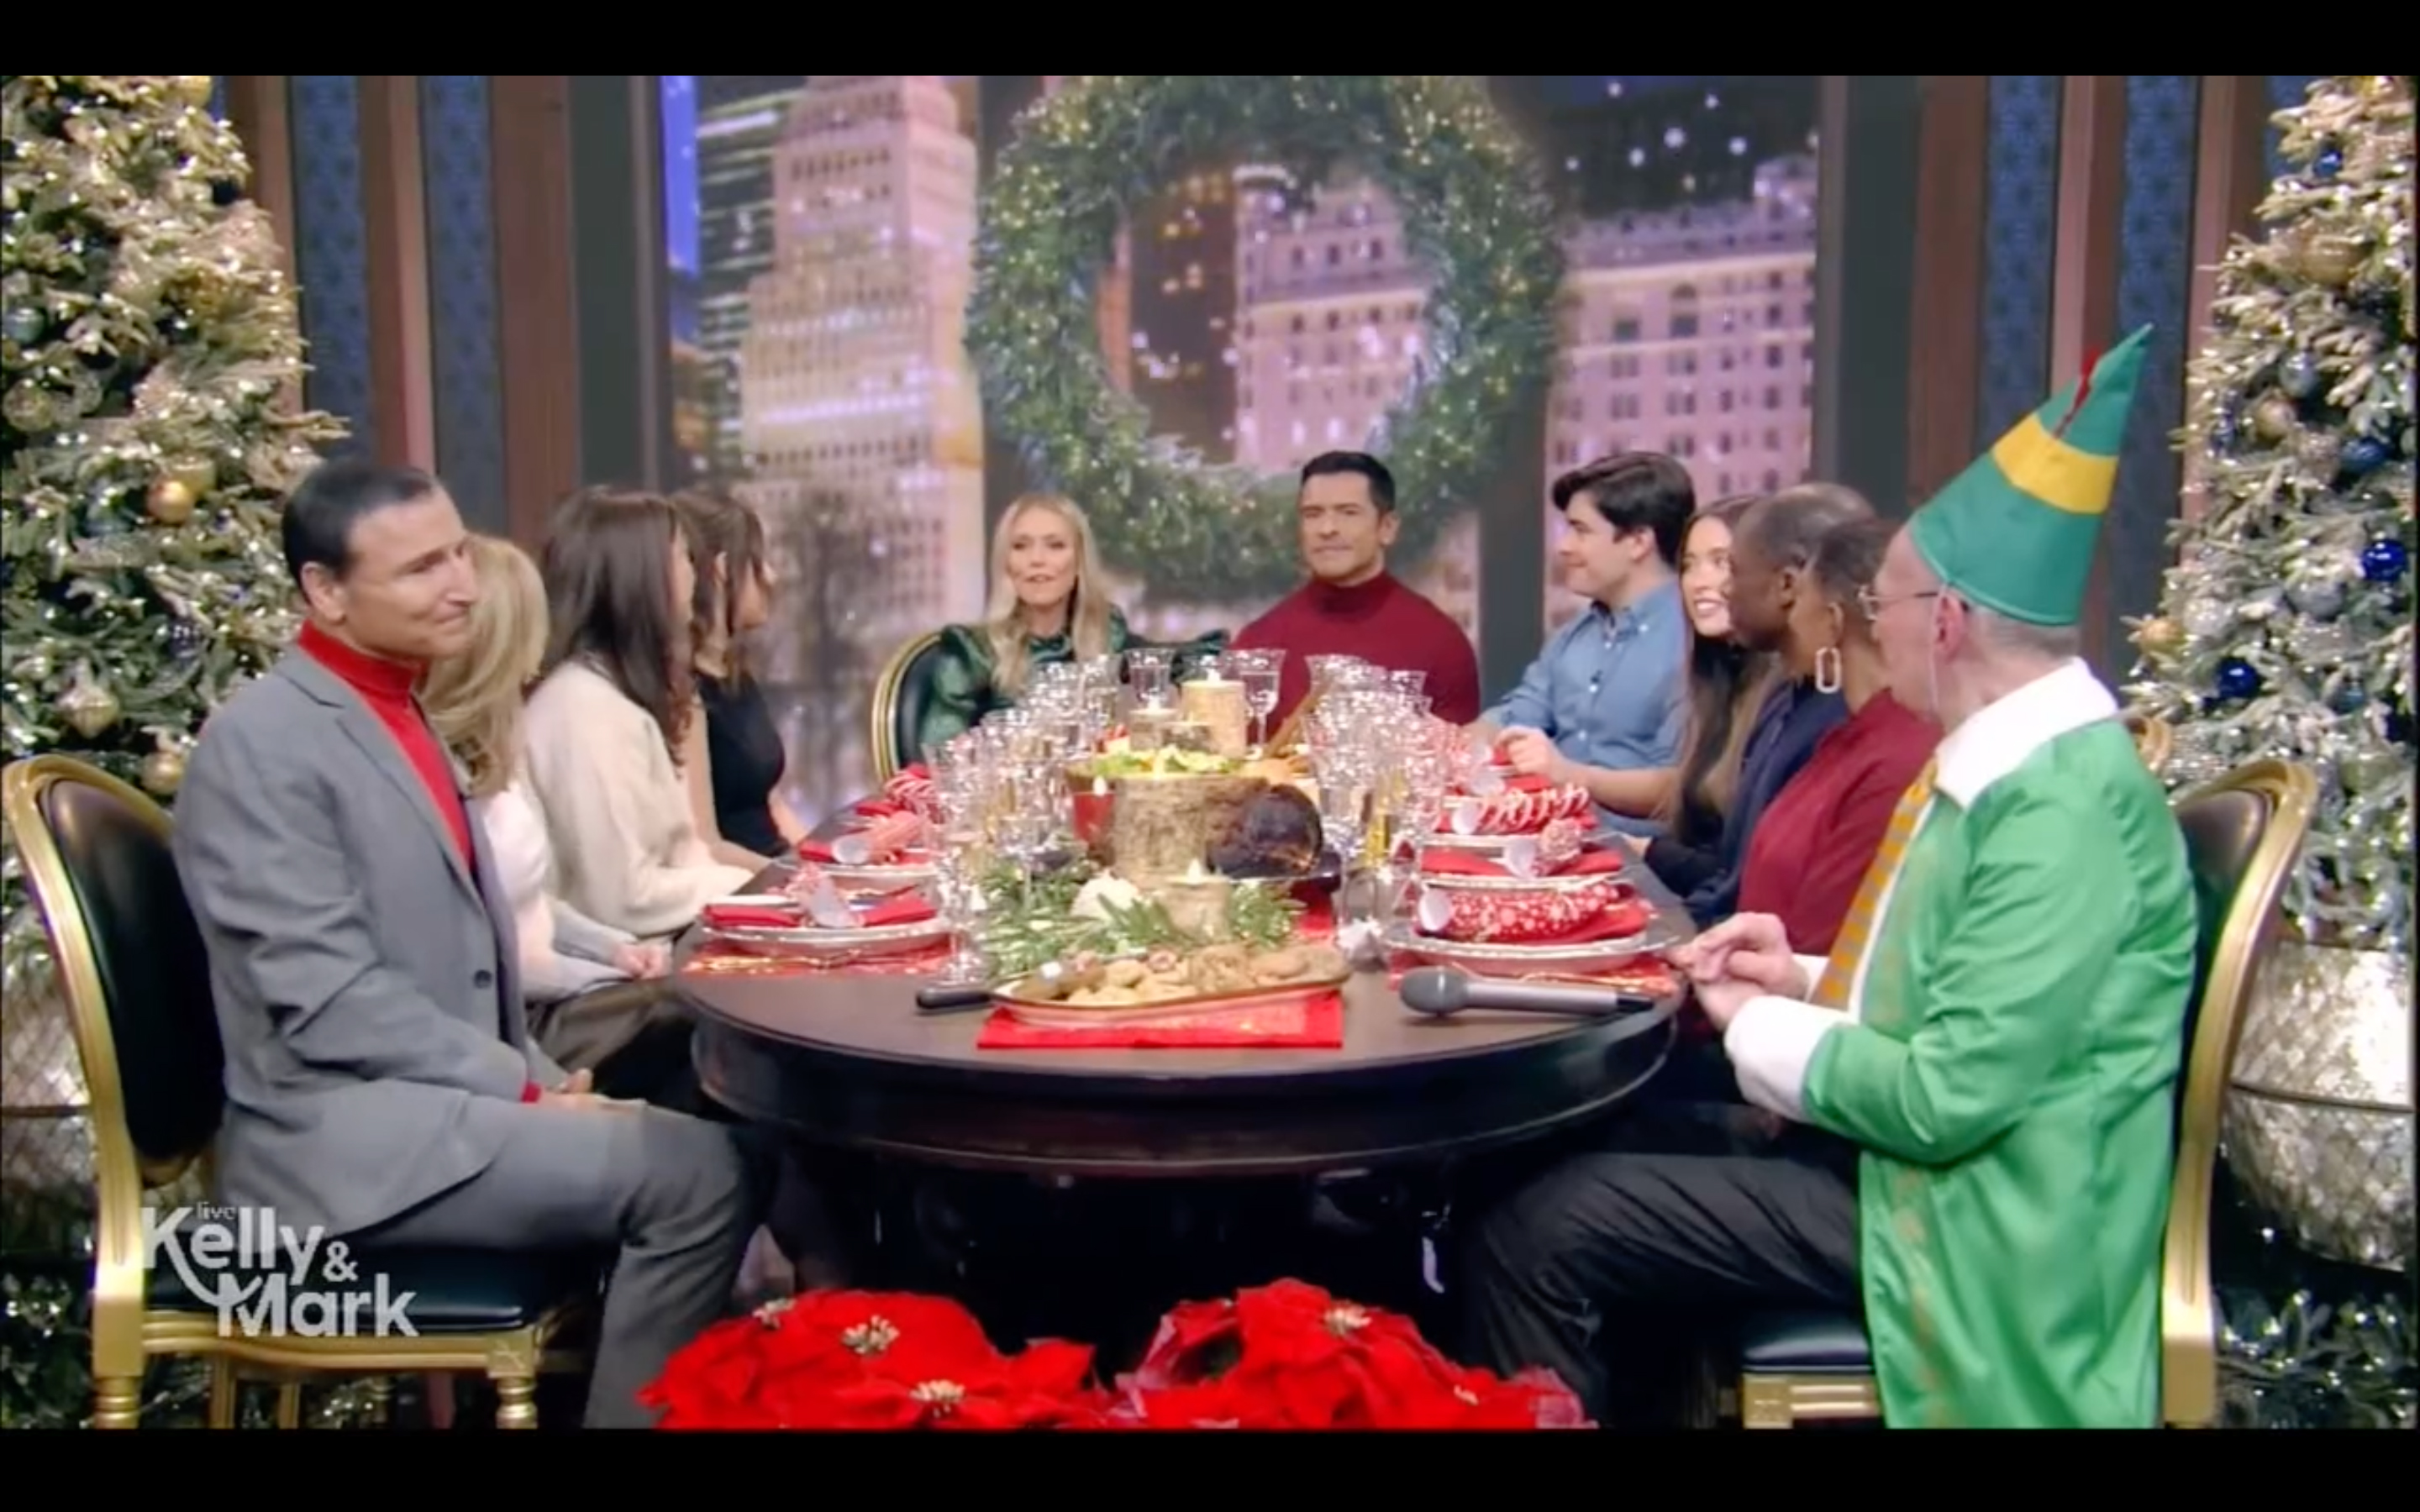 The hosts also didn't have any celebrity guests on the show and instead had their family and the producers' families